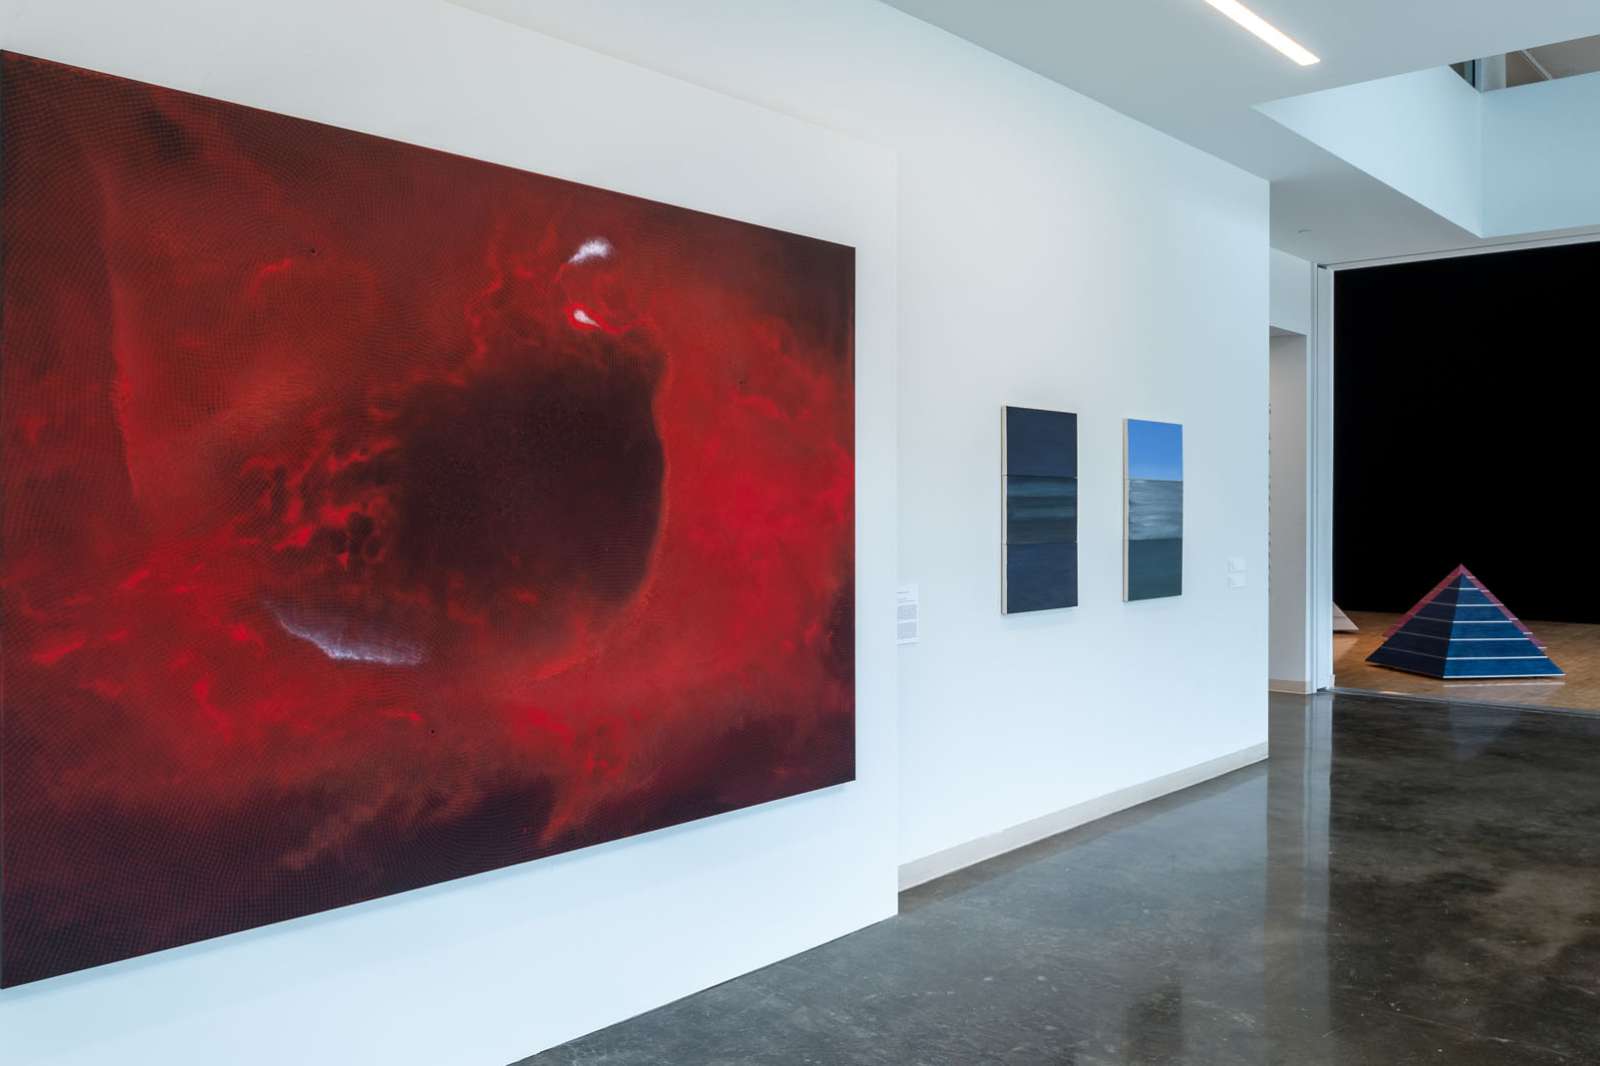 Installation view with painting by Shirazeh Houshiary, 'Flare Up' (2018; foreground), and works by Byron Kim, and Sam Gilliam (background) 